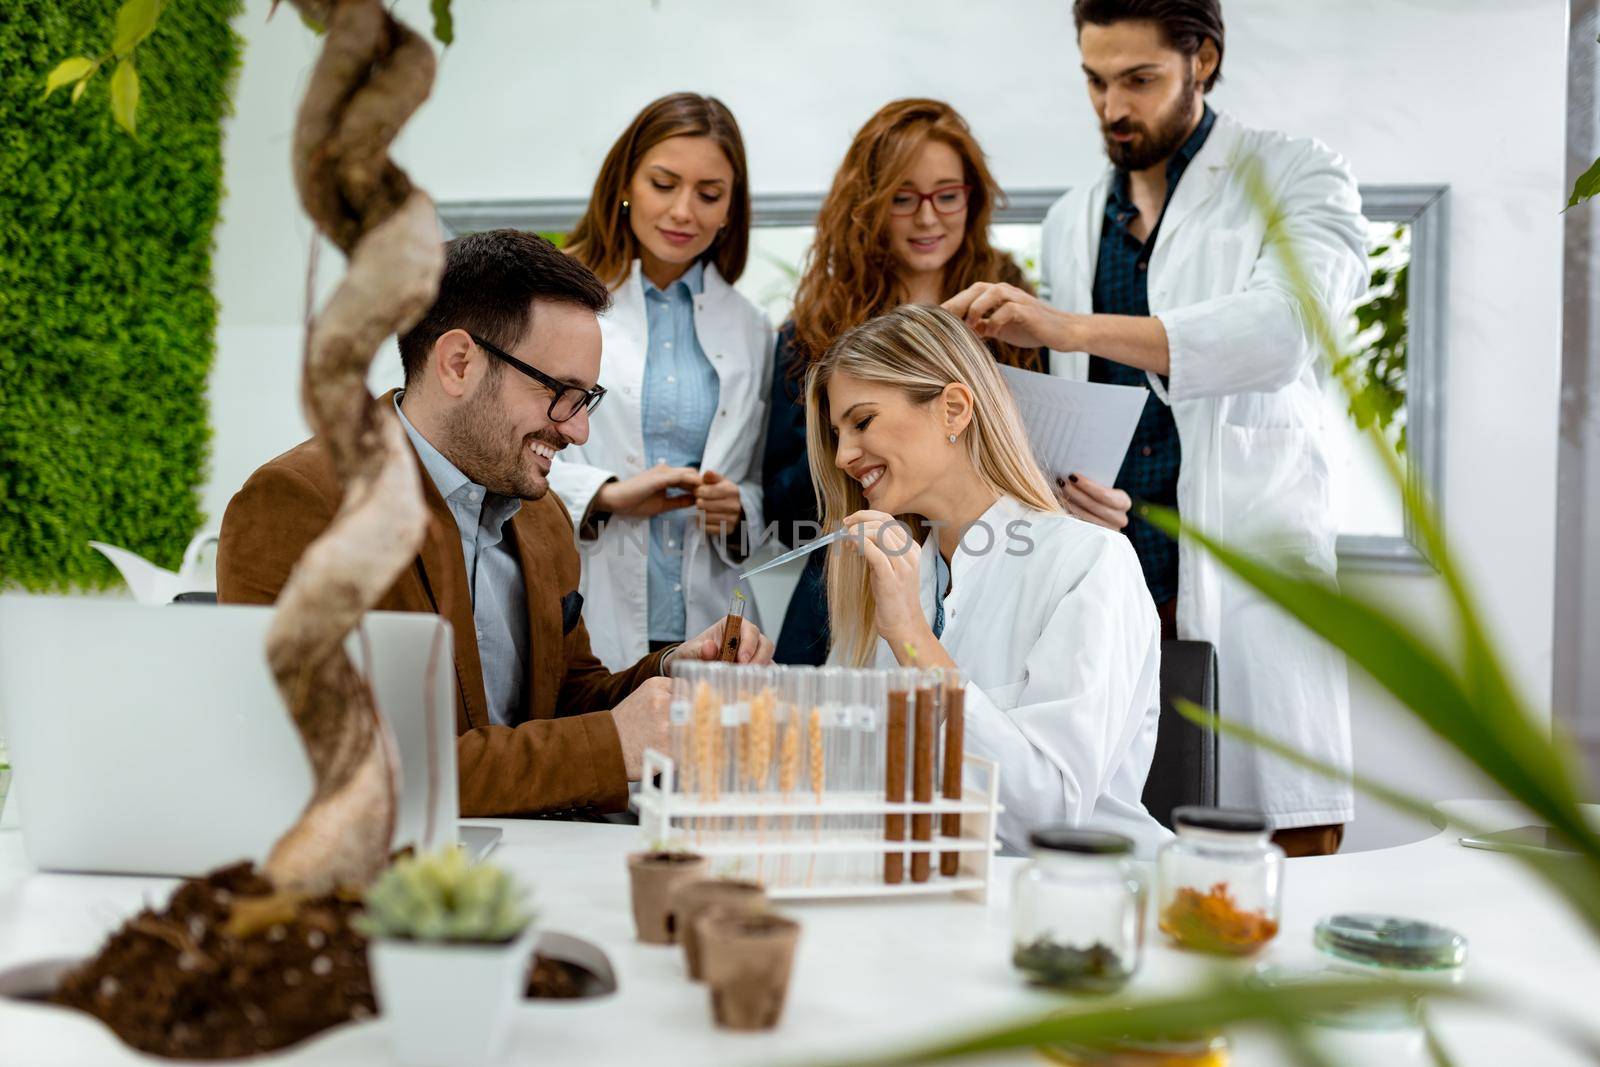 University colleague biologists taking experiment on sprout and checking the analysis of the sample of plant in the lab tube.